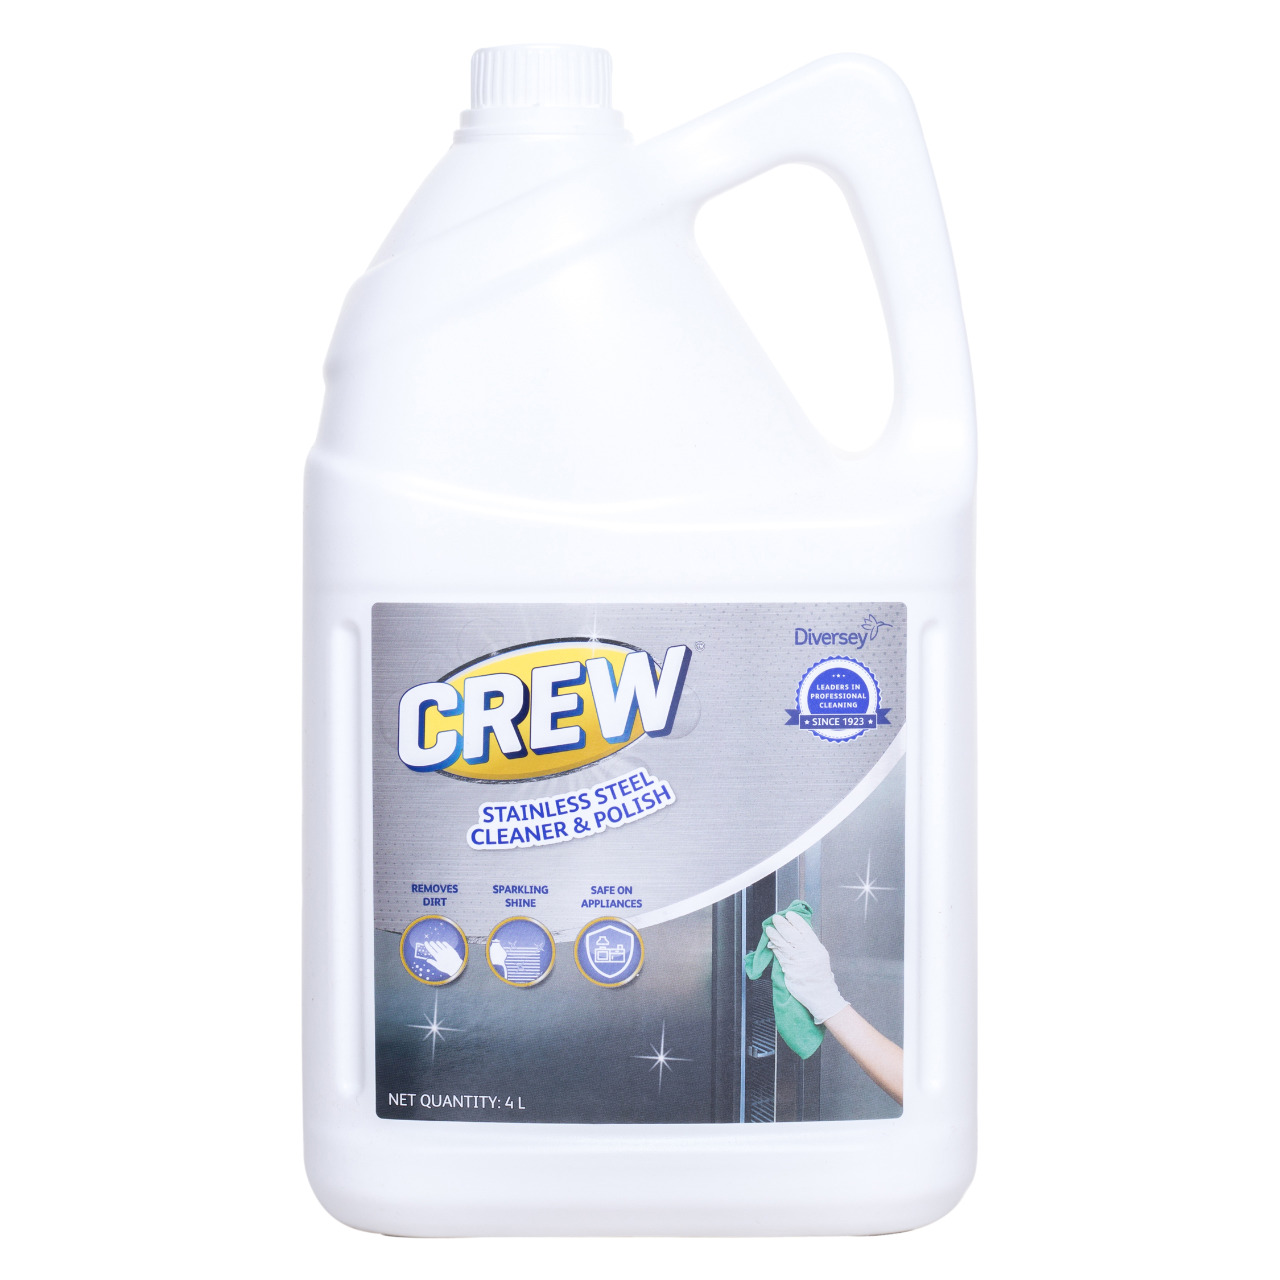 Crew Stainless Steel Cleaner - 5 Ltr